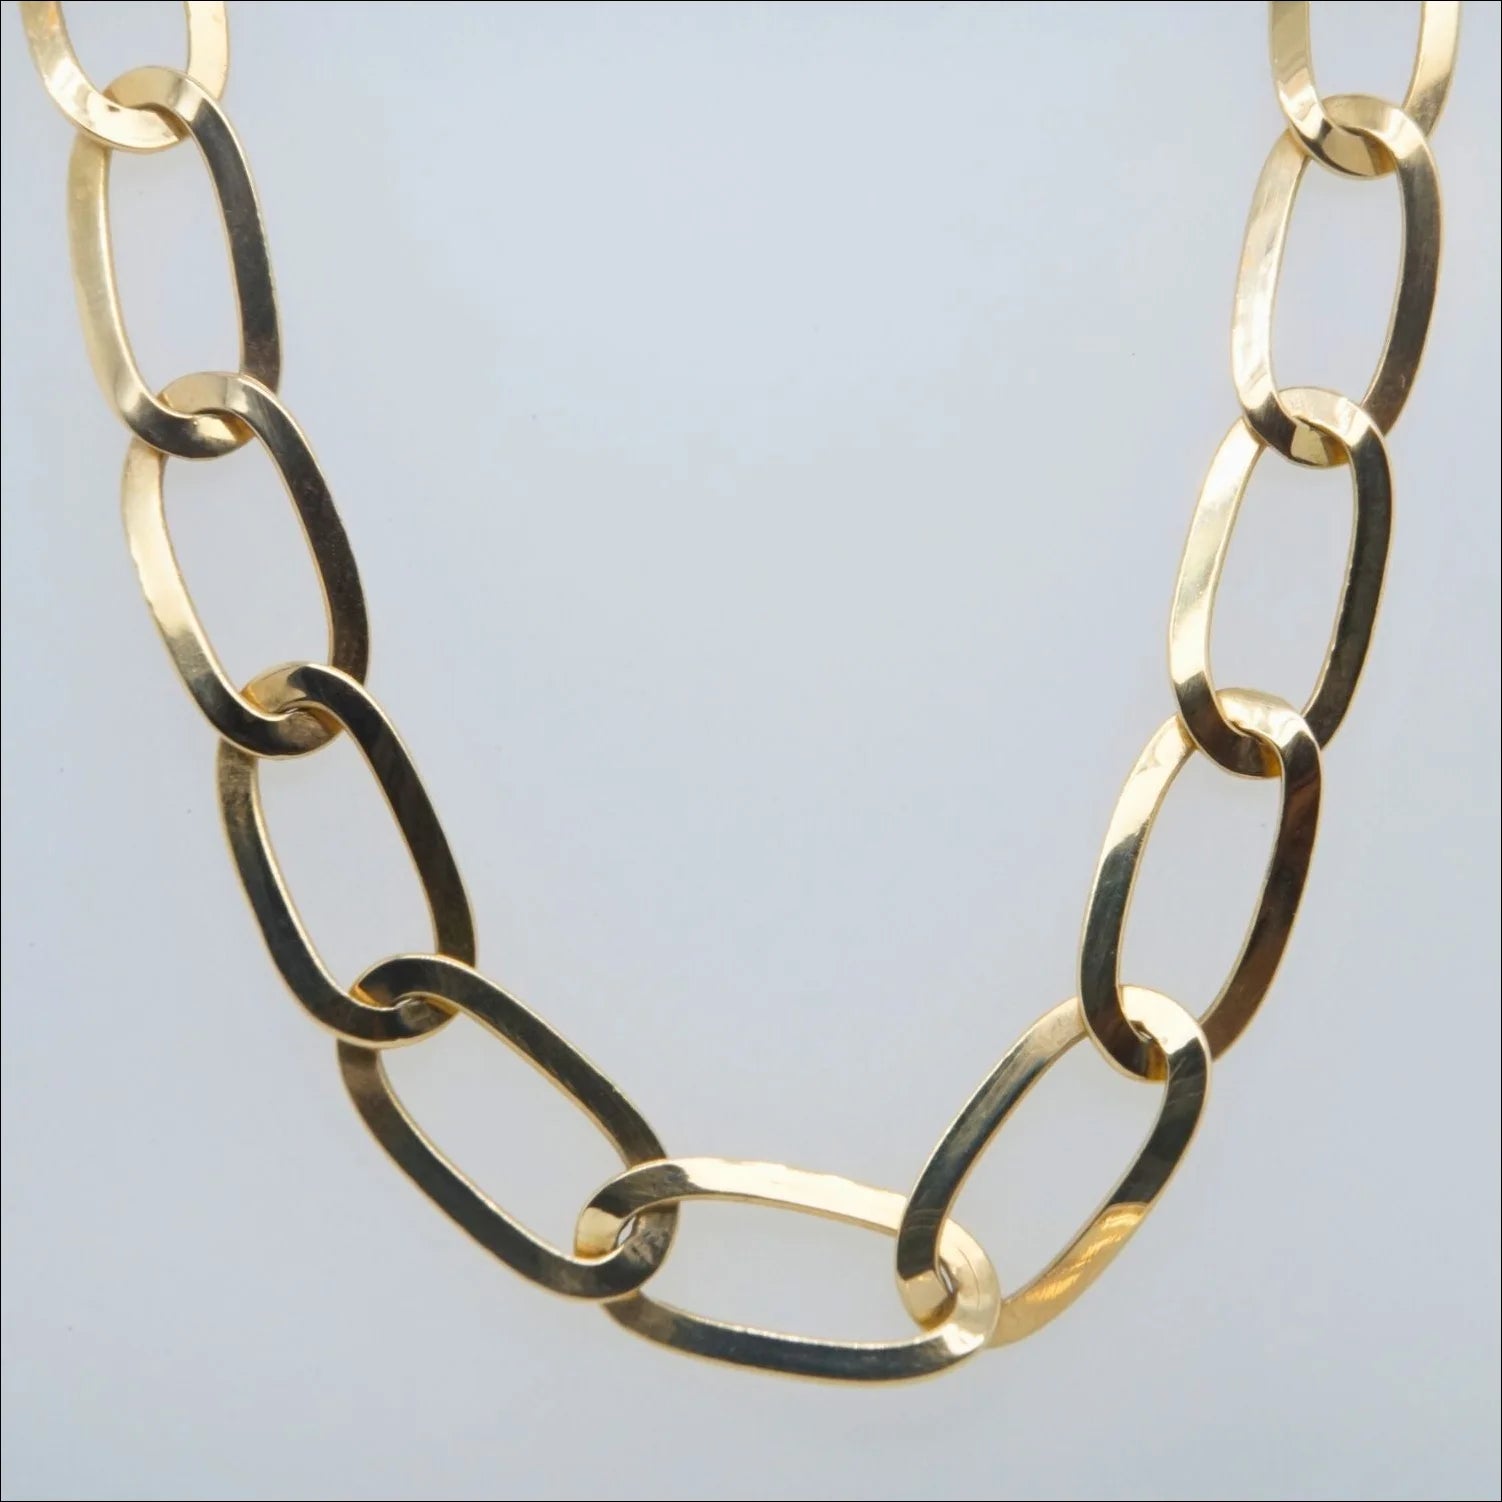 Exquisite Art Gold 18k Gold Chain | Chains